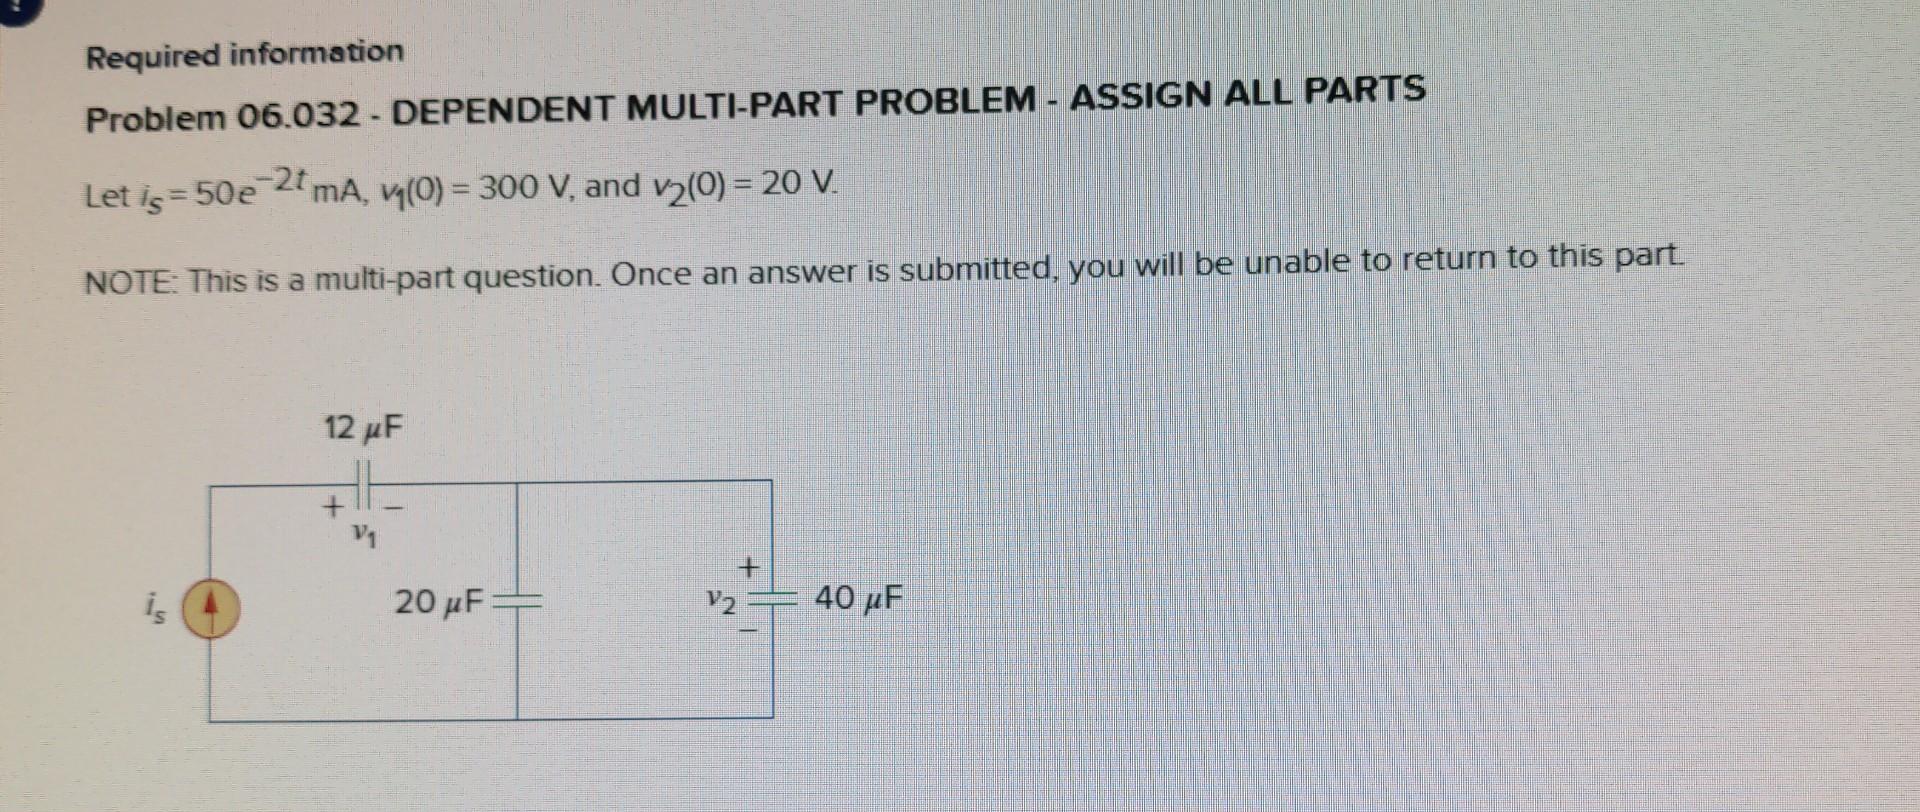 Required information
Problem 06.032 - DEPENDENT MULTI-PART PROBLEM - ASSIGN ALL PARTS
Let \( i_{s}=50 e^{-2 t} \mathrm{~mA},